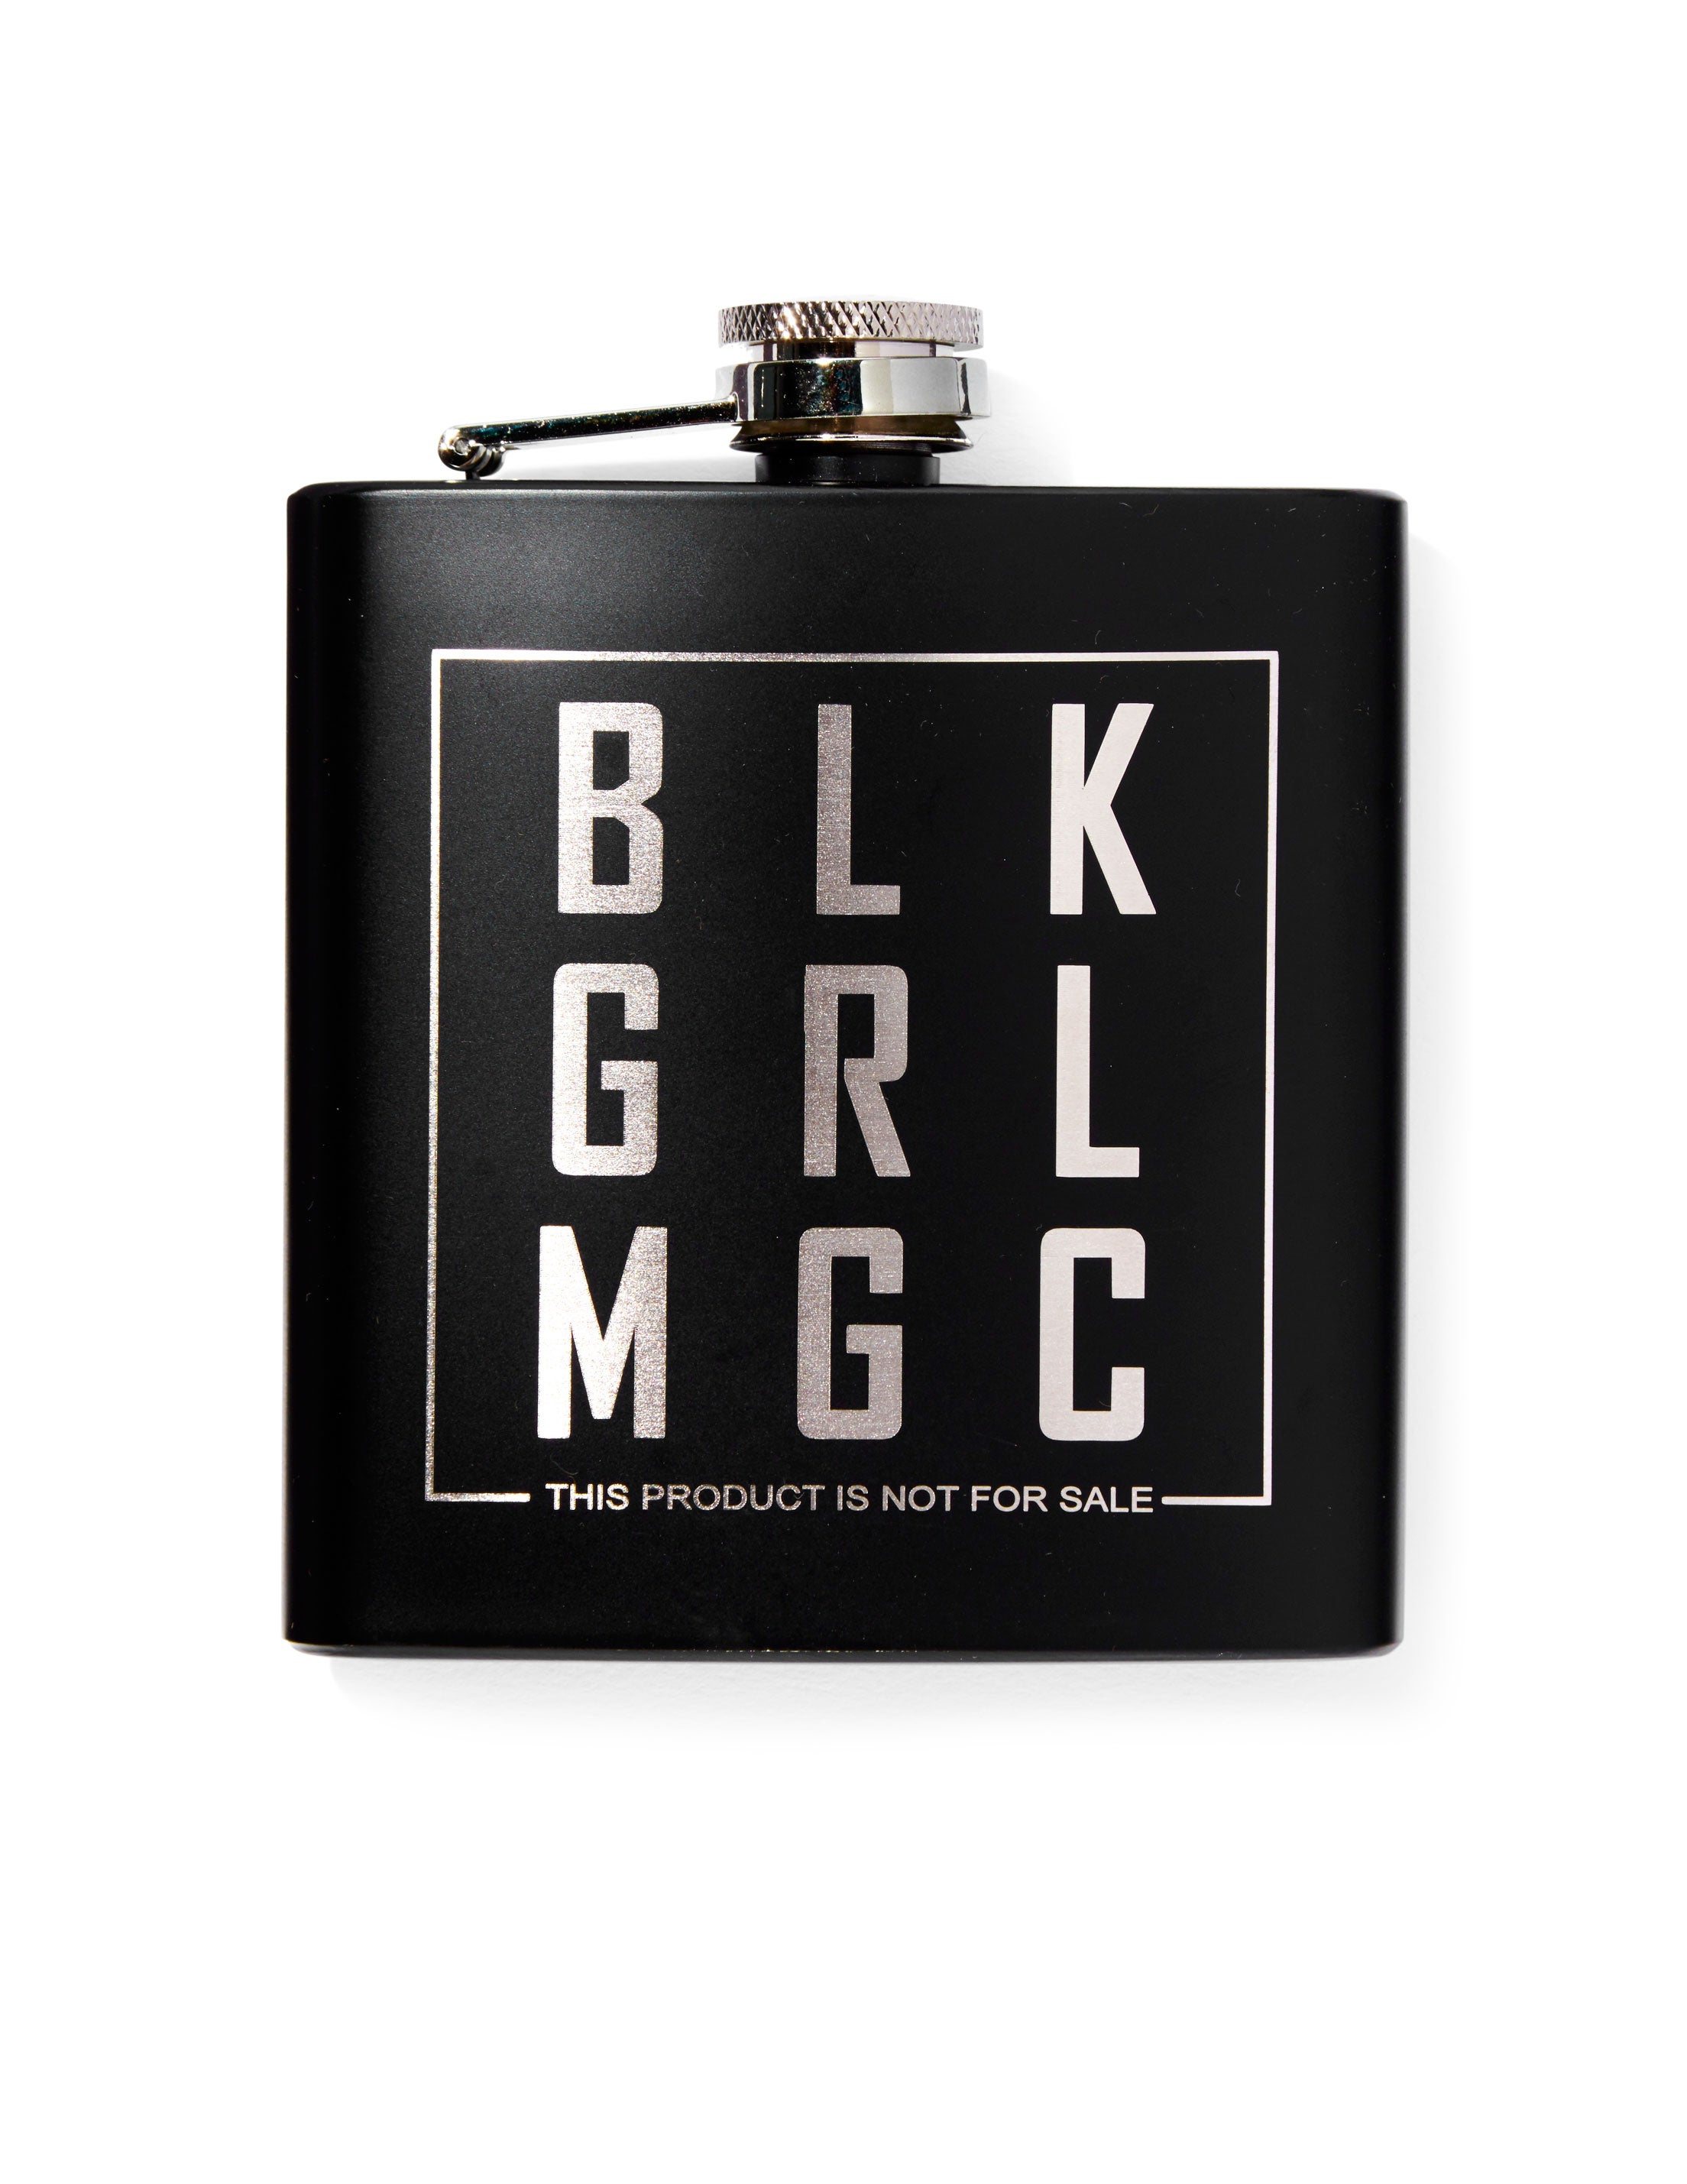 #BuyBlack Christmas Gift Guide: 11 Great Gifts For Your Friend Who's Down For The Cause
